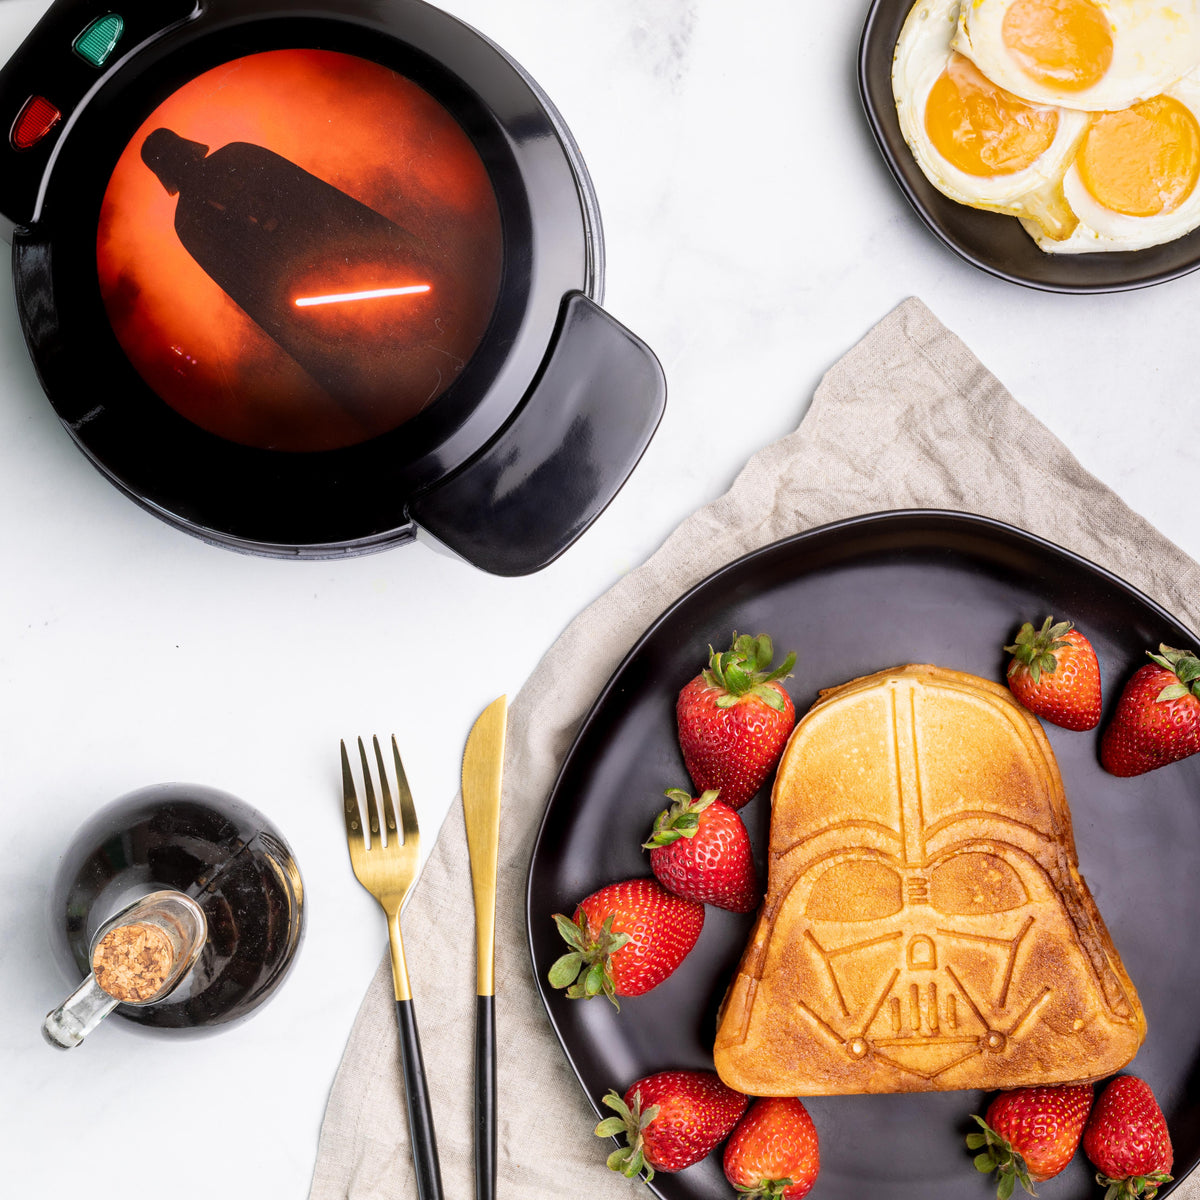 Star Wars Darth Vader Waffle Maker - Red Silhouette